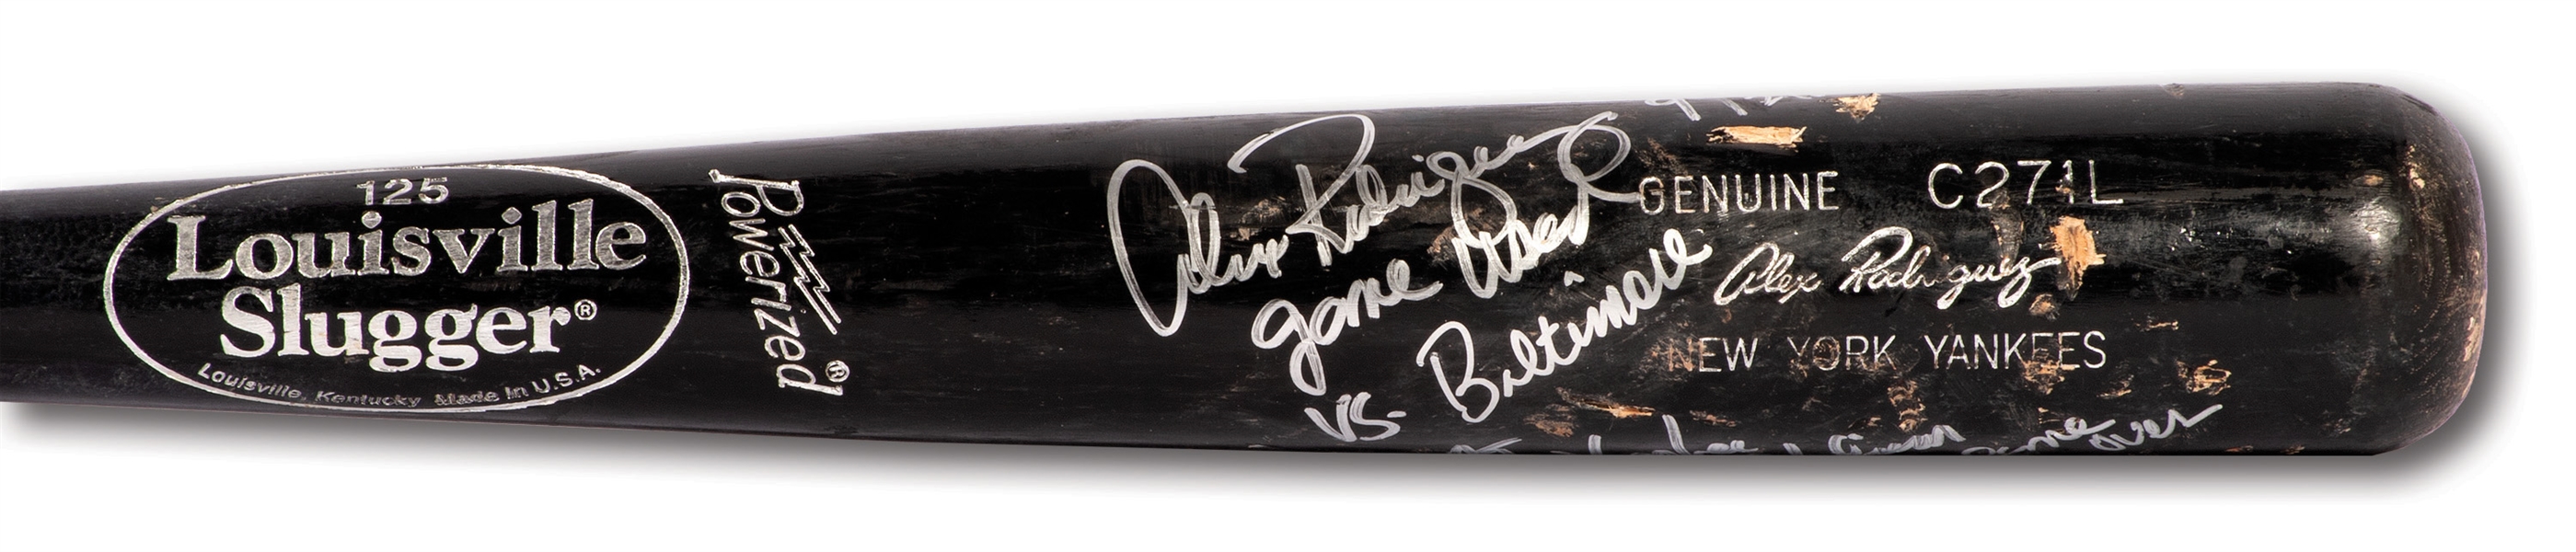 9/21/2008 ALEX RODRIGUEZ SIGNED & INSCRIBED LOUISVILLE SLUGGER BAT USED IN THE FINAL GAME EVER PLAYED AT OLD YANKEE STADIUM (PSA/DNA GU 10)